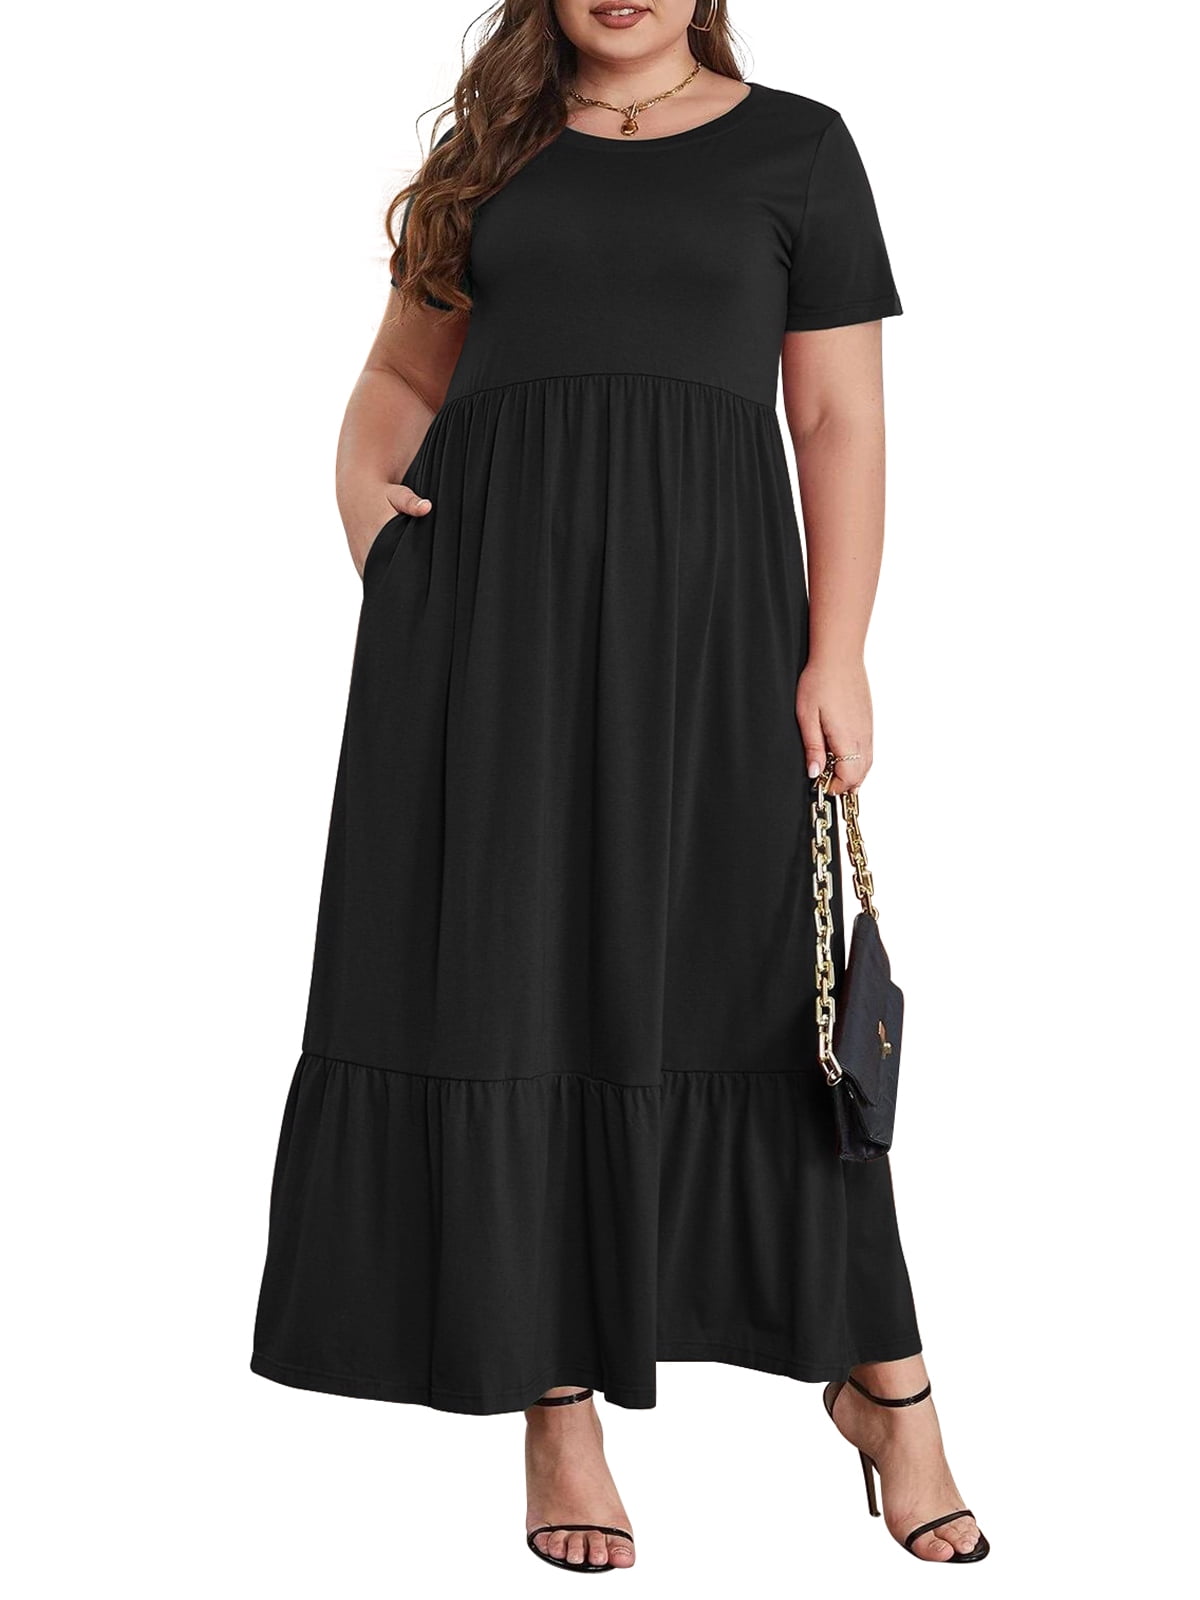 Mengpipi Women's Plus Size Casual Short Sleeve Crewneck Dress Flowy Tiered Loose Maxi Dress with Pockets Black 1X-5X - image 2 of 4